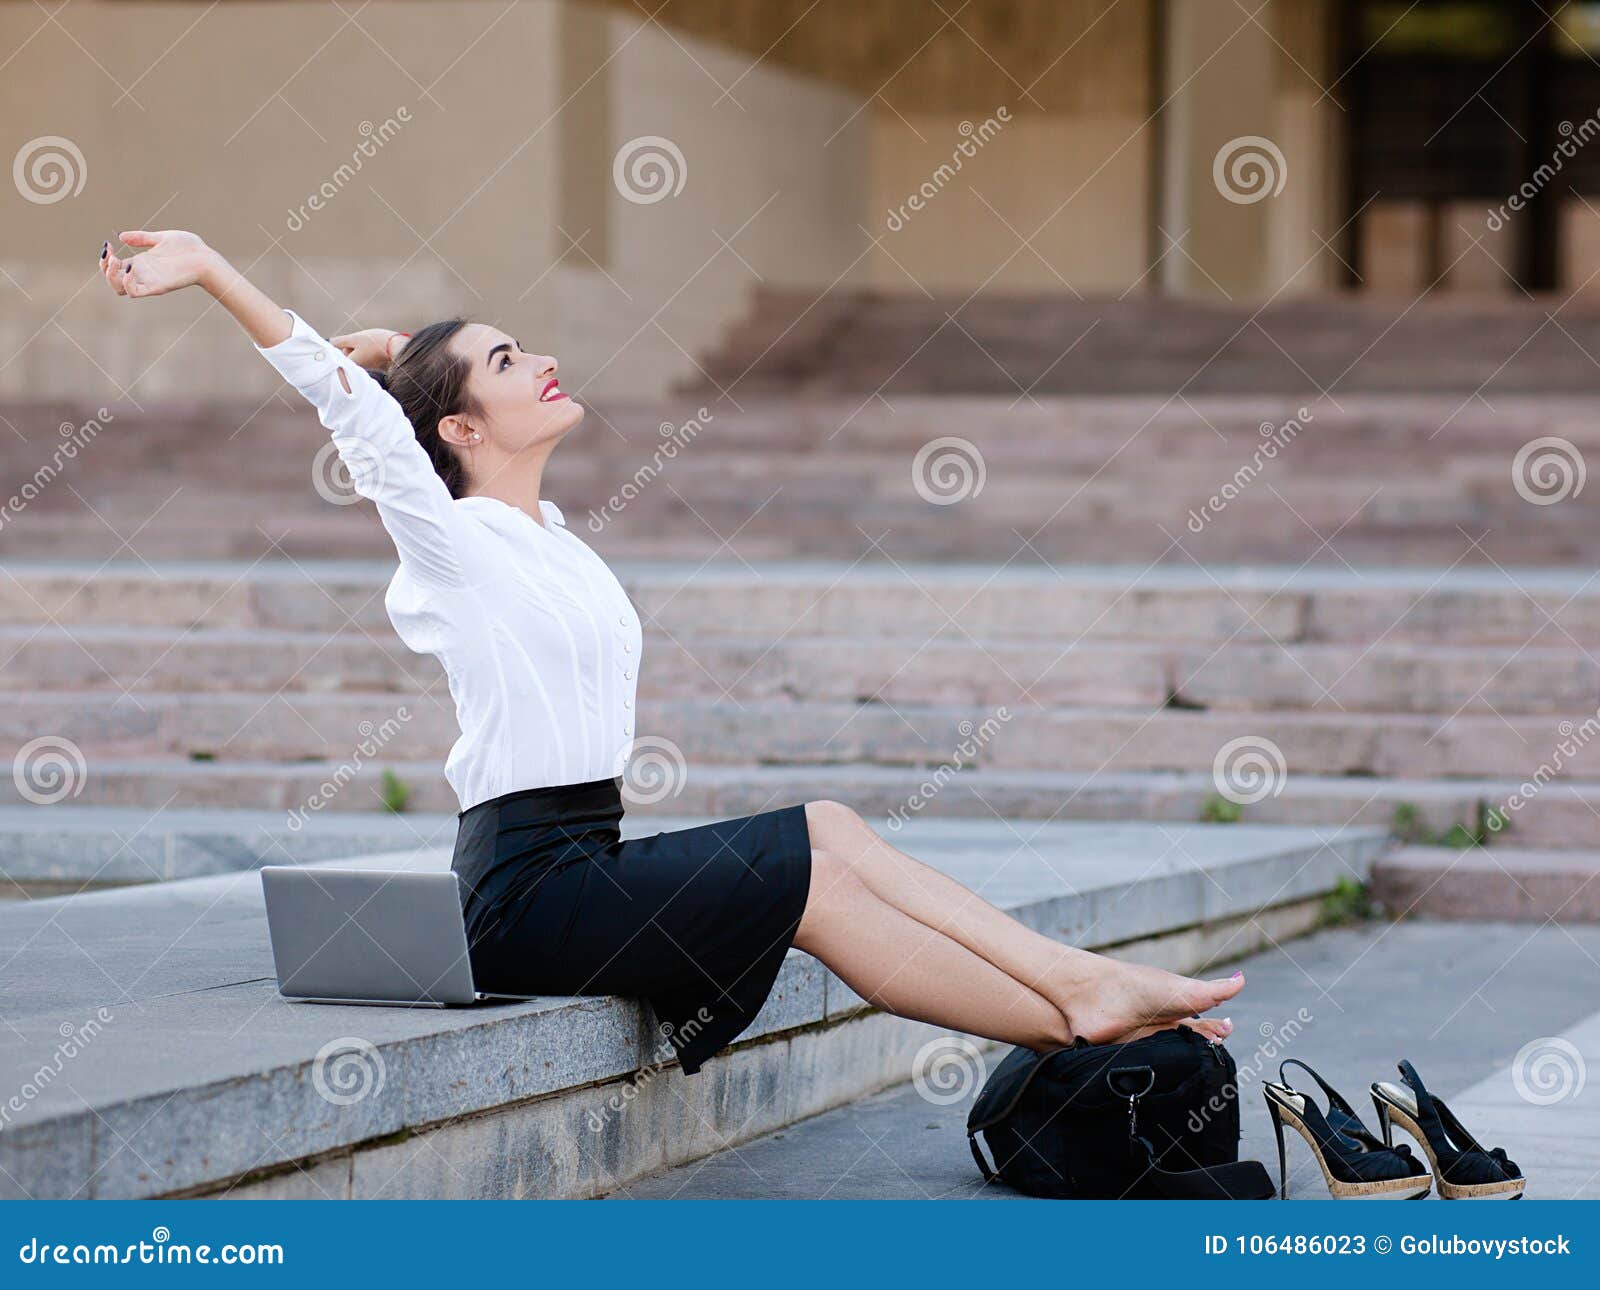 https://thumbs.dreamstime.com/z/relaxed-content-urban-business-woman-outdoor-working-lifestyle-106486023.jpg